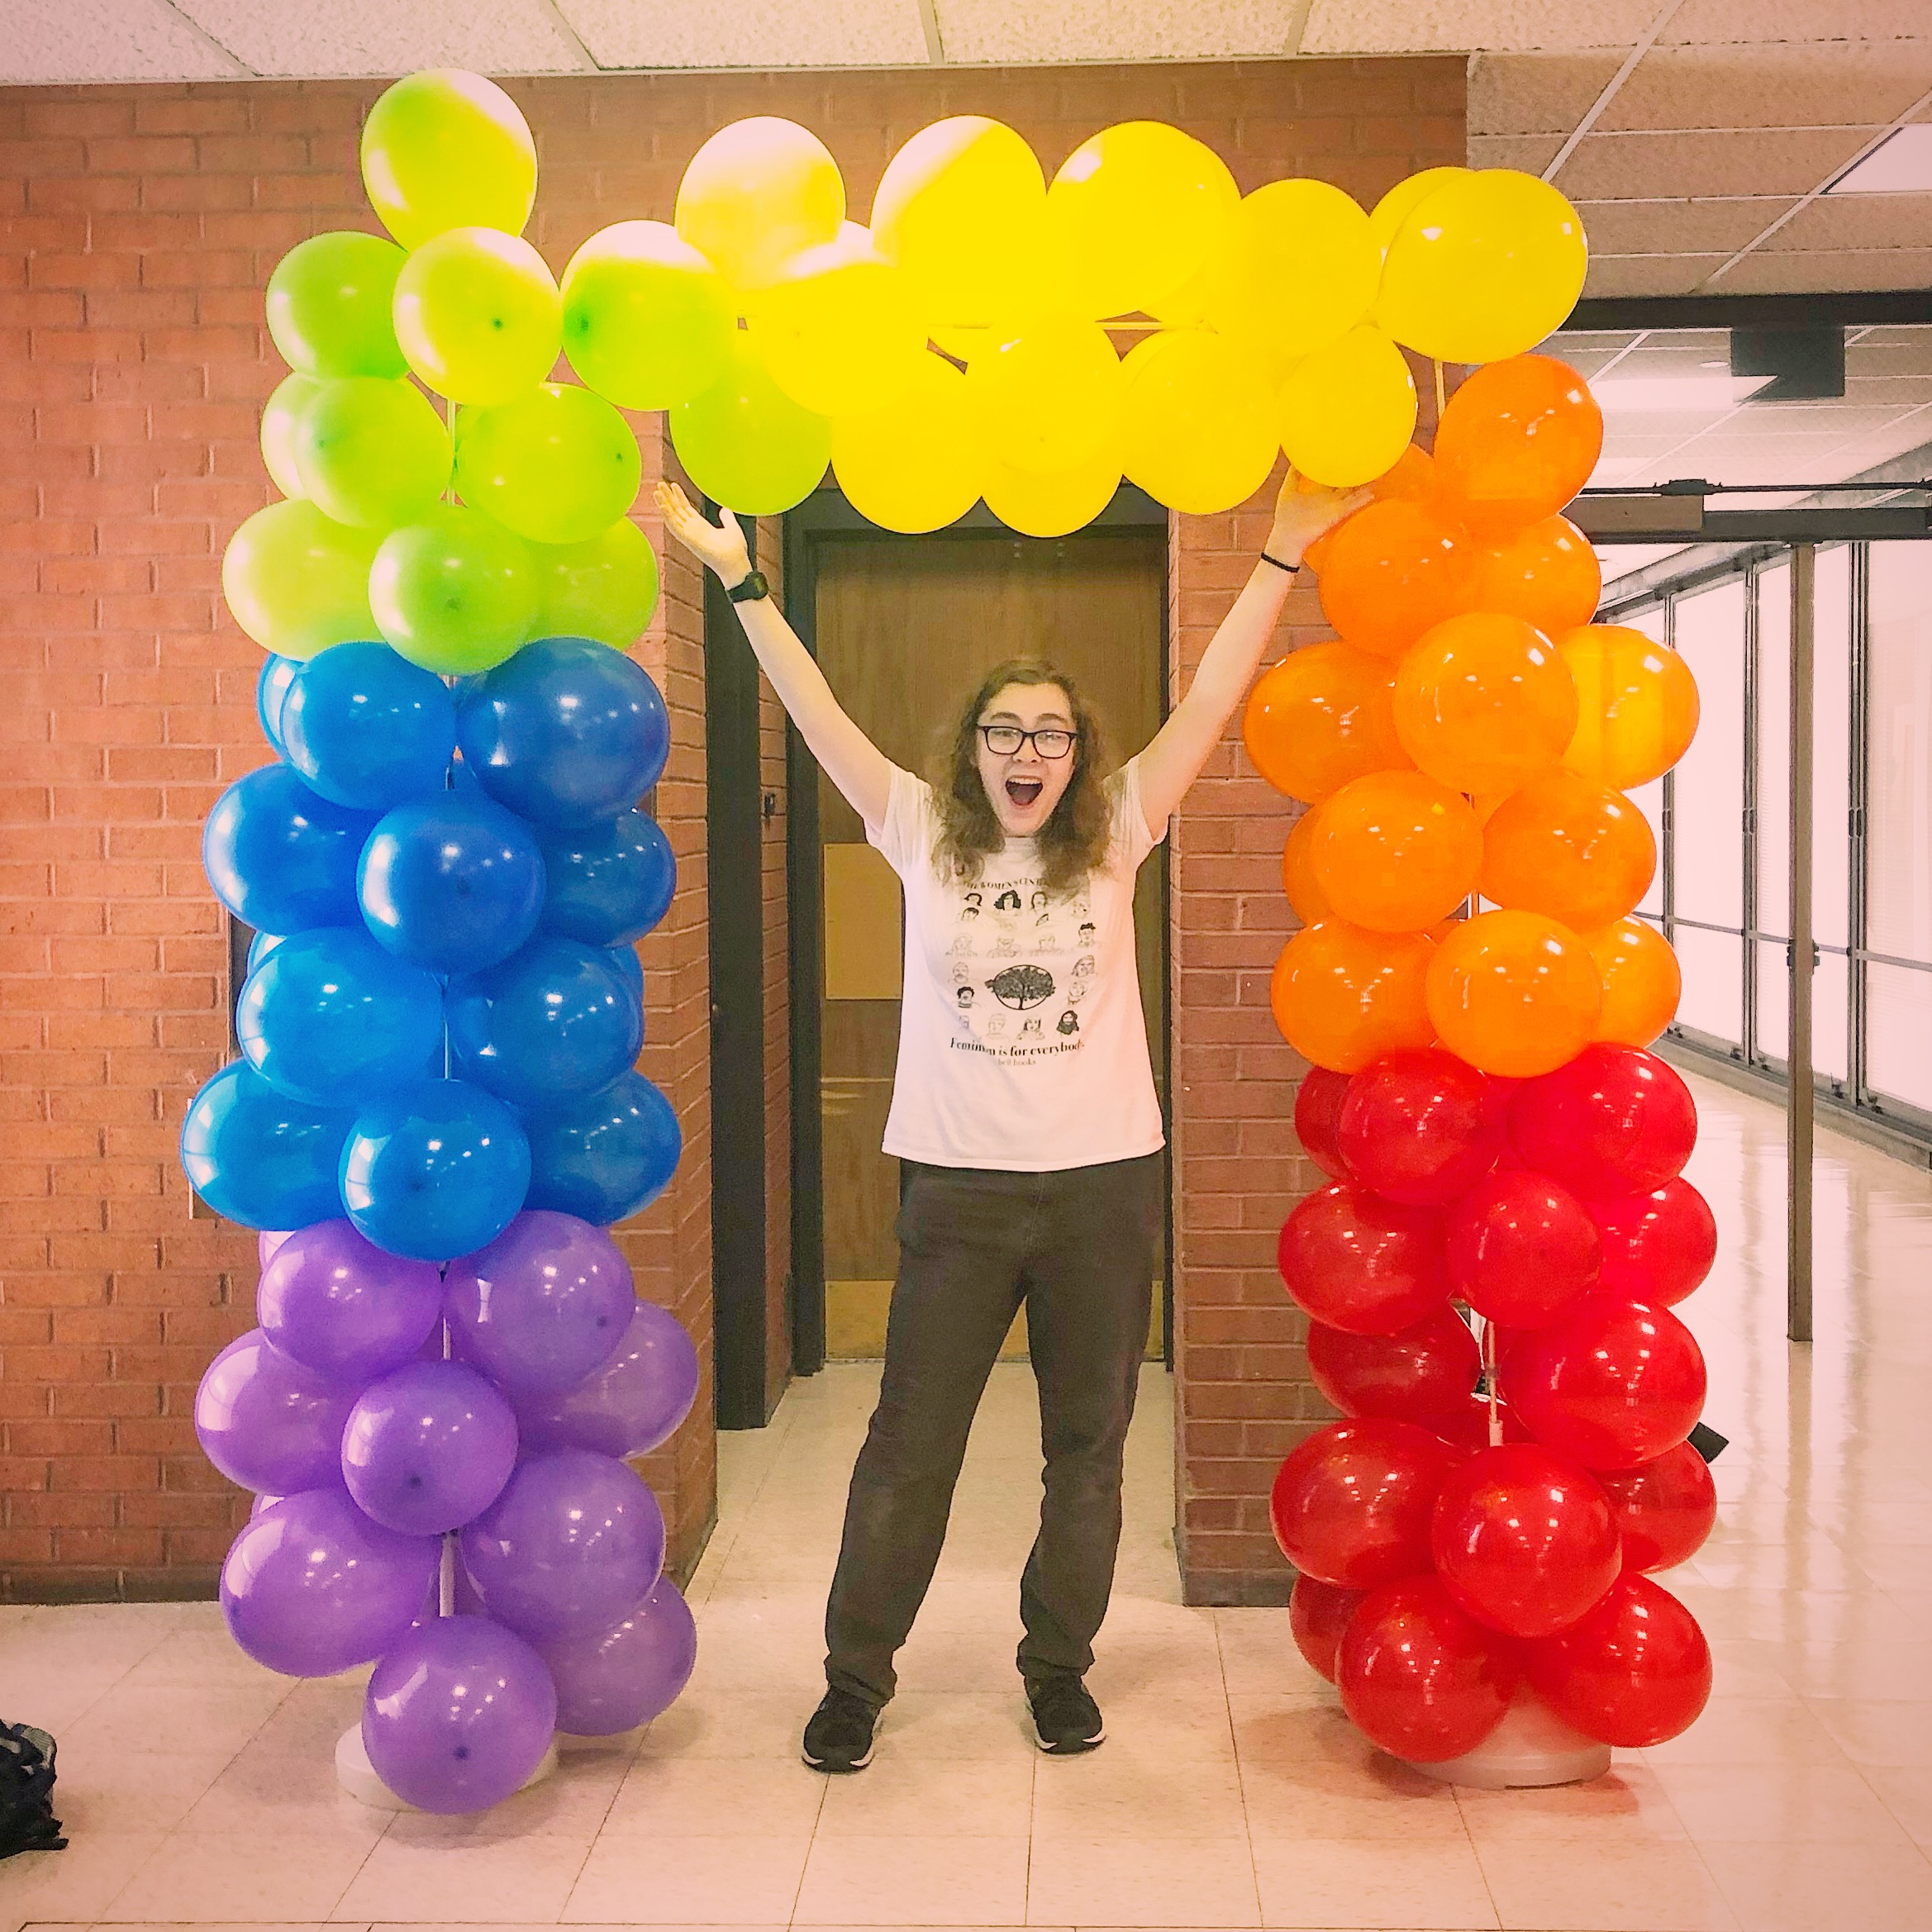 Student leader, Autumn, standing with a balloon arch we made to celebrate the opening of UMBC's first multi-user all-gender restroom.